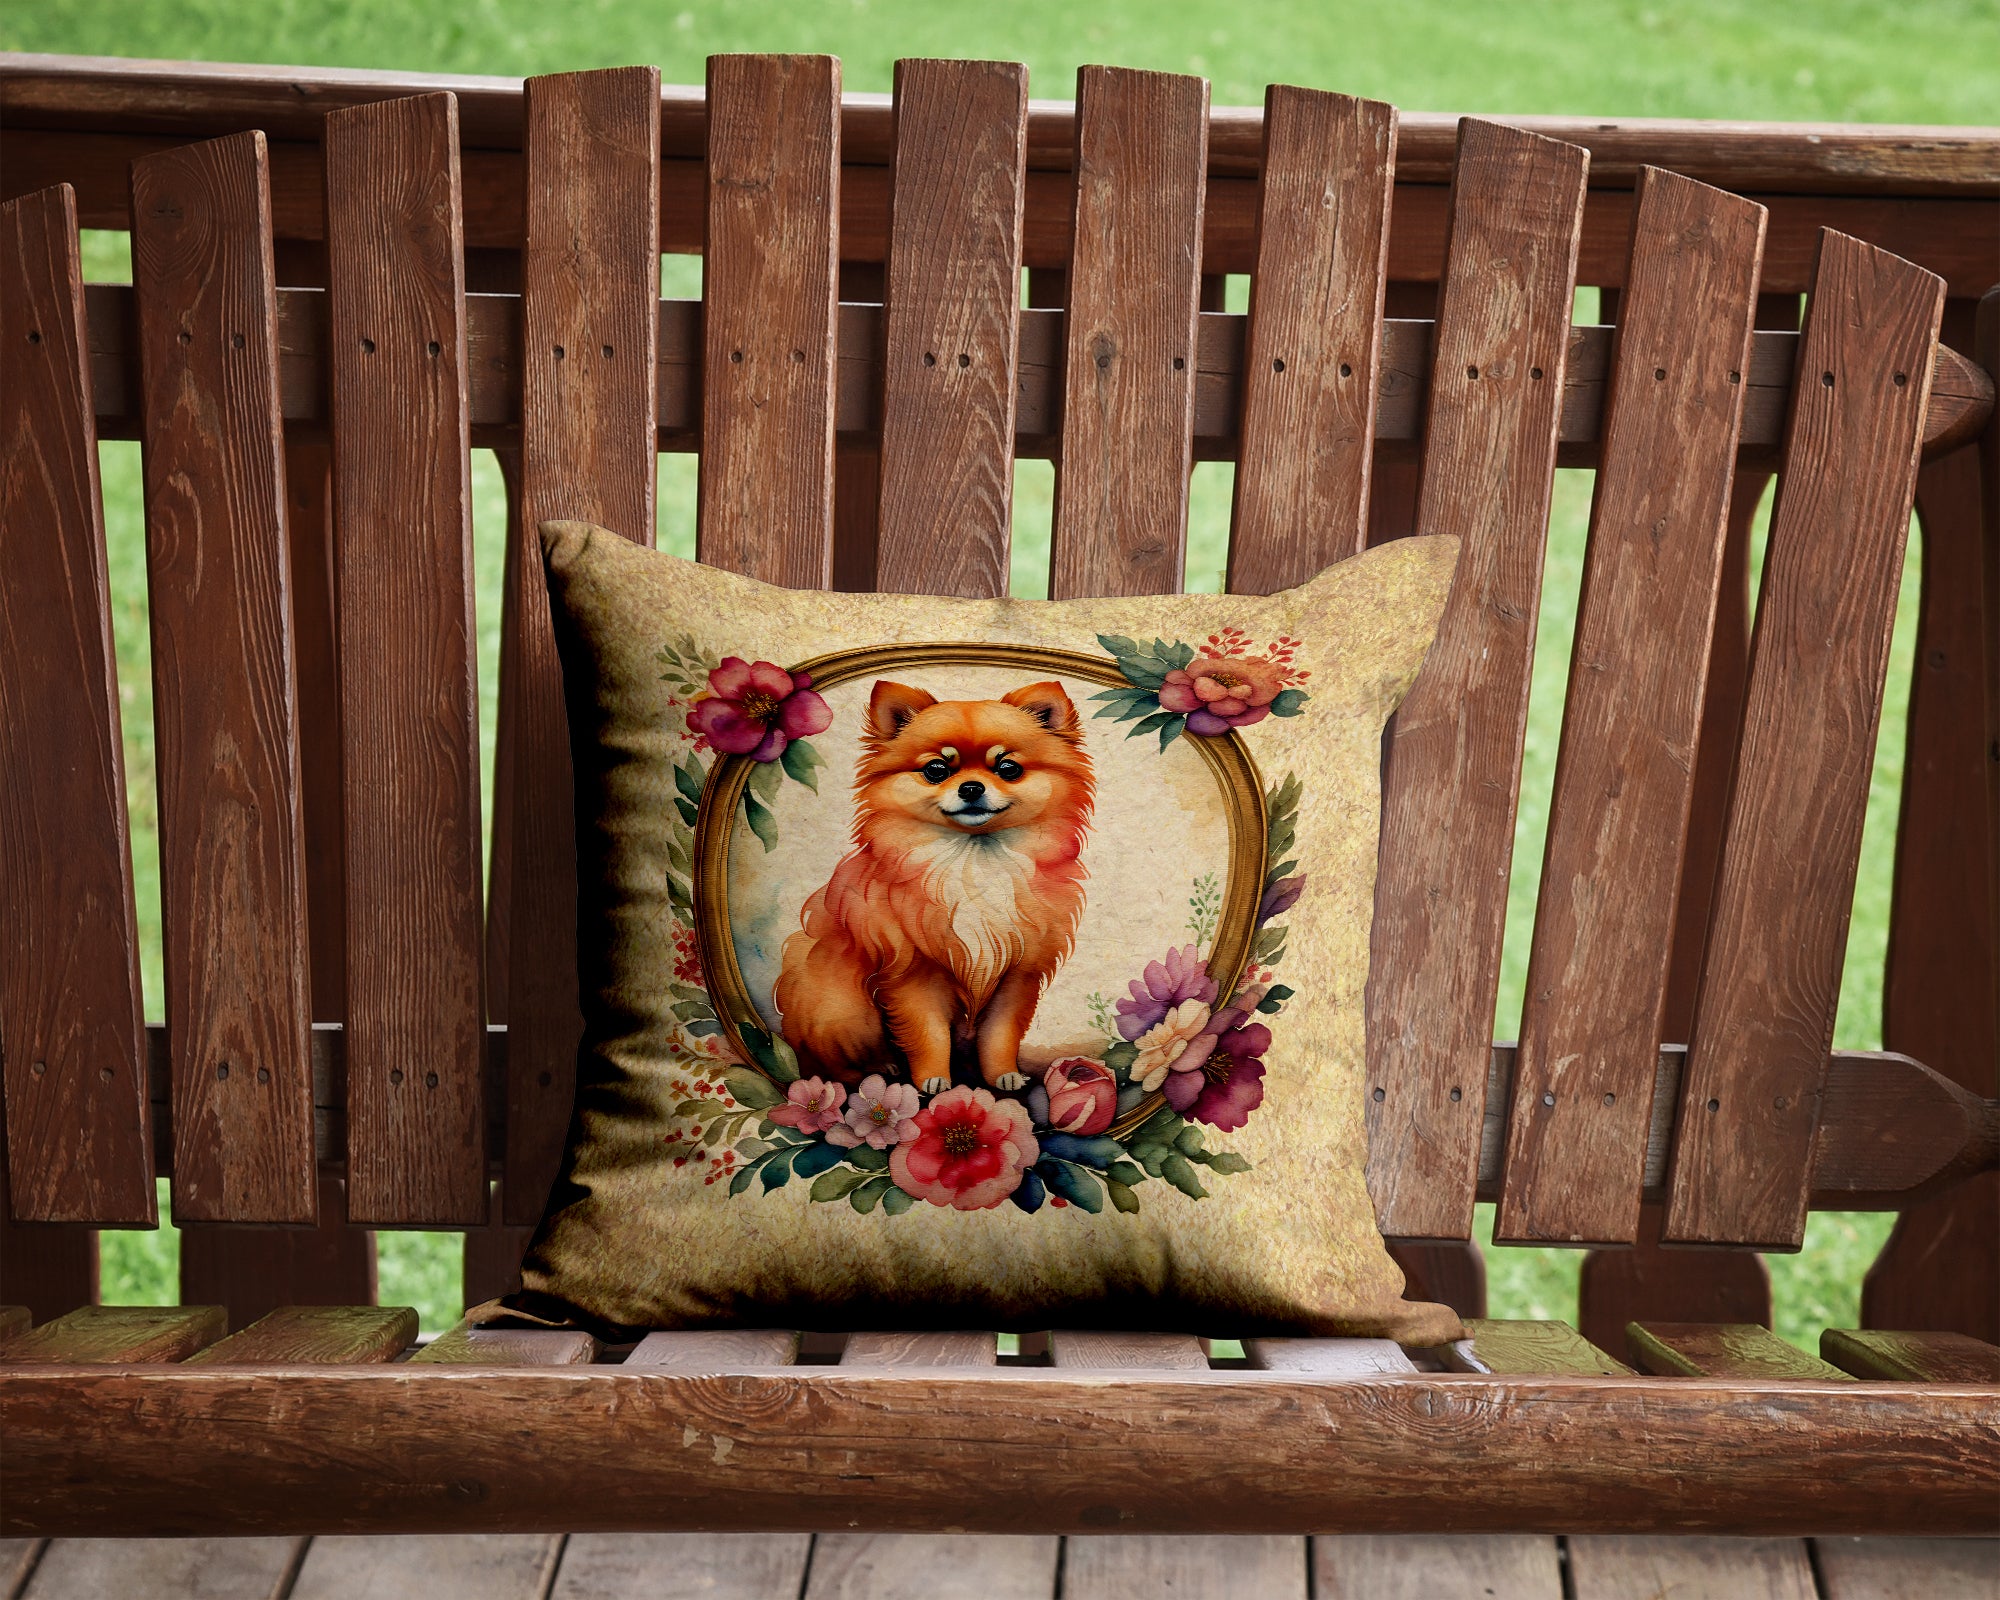 Buy this Pomeranian and Flowers Fabric Decorative Pillow